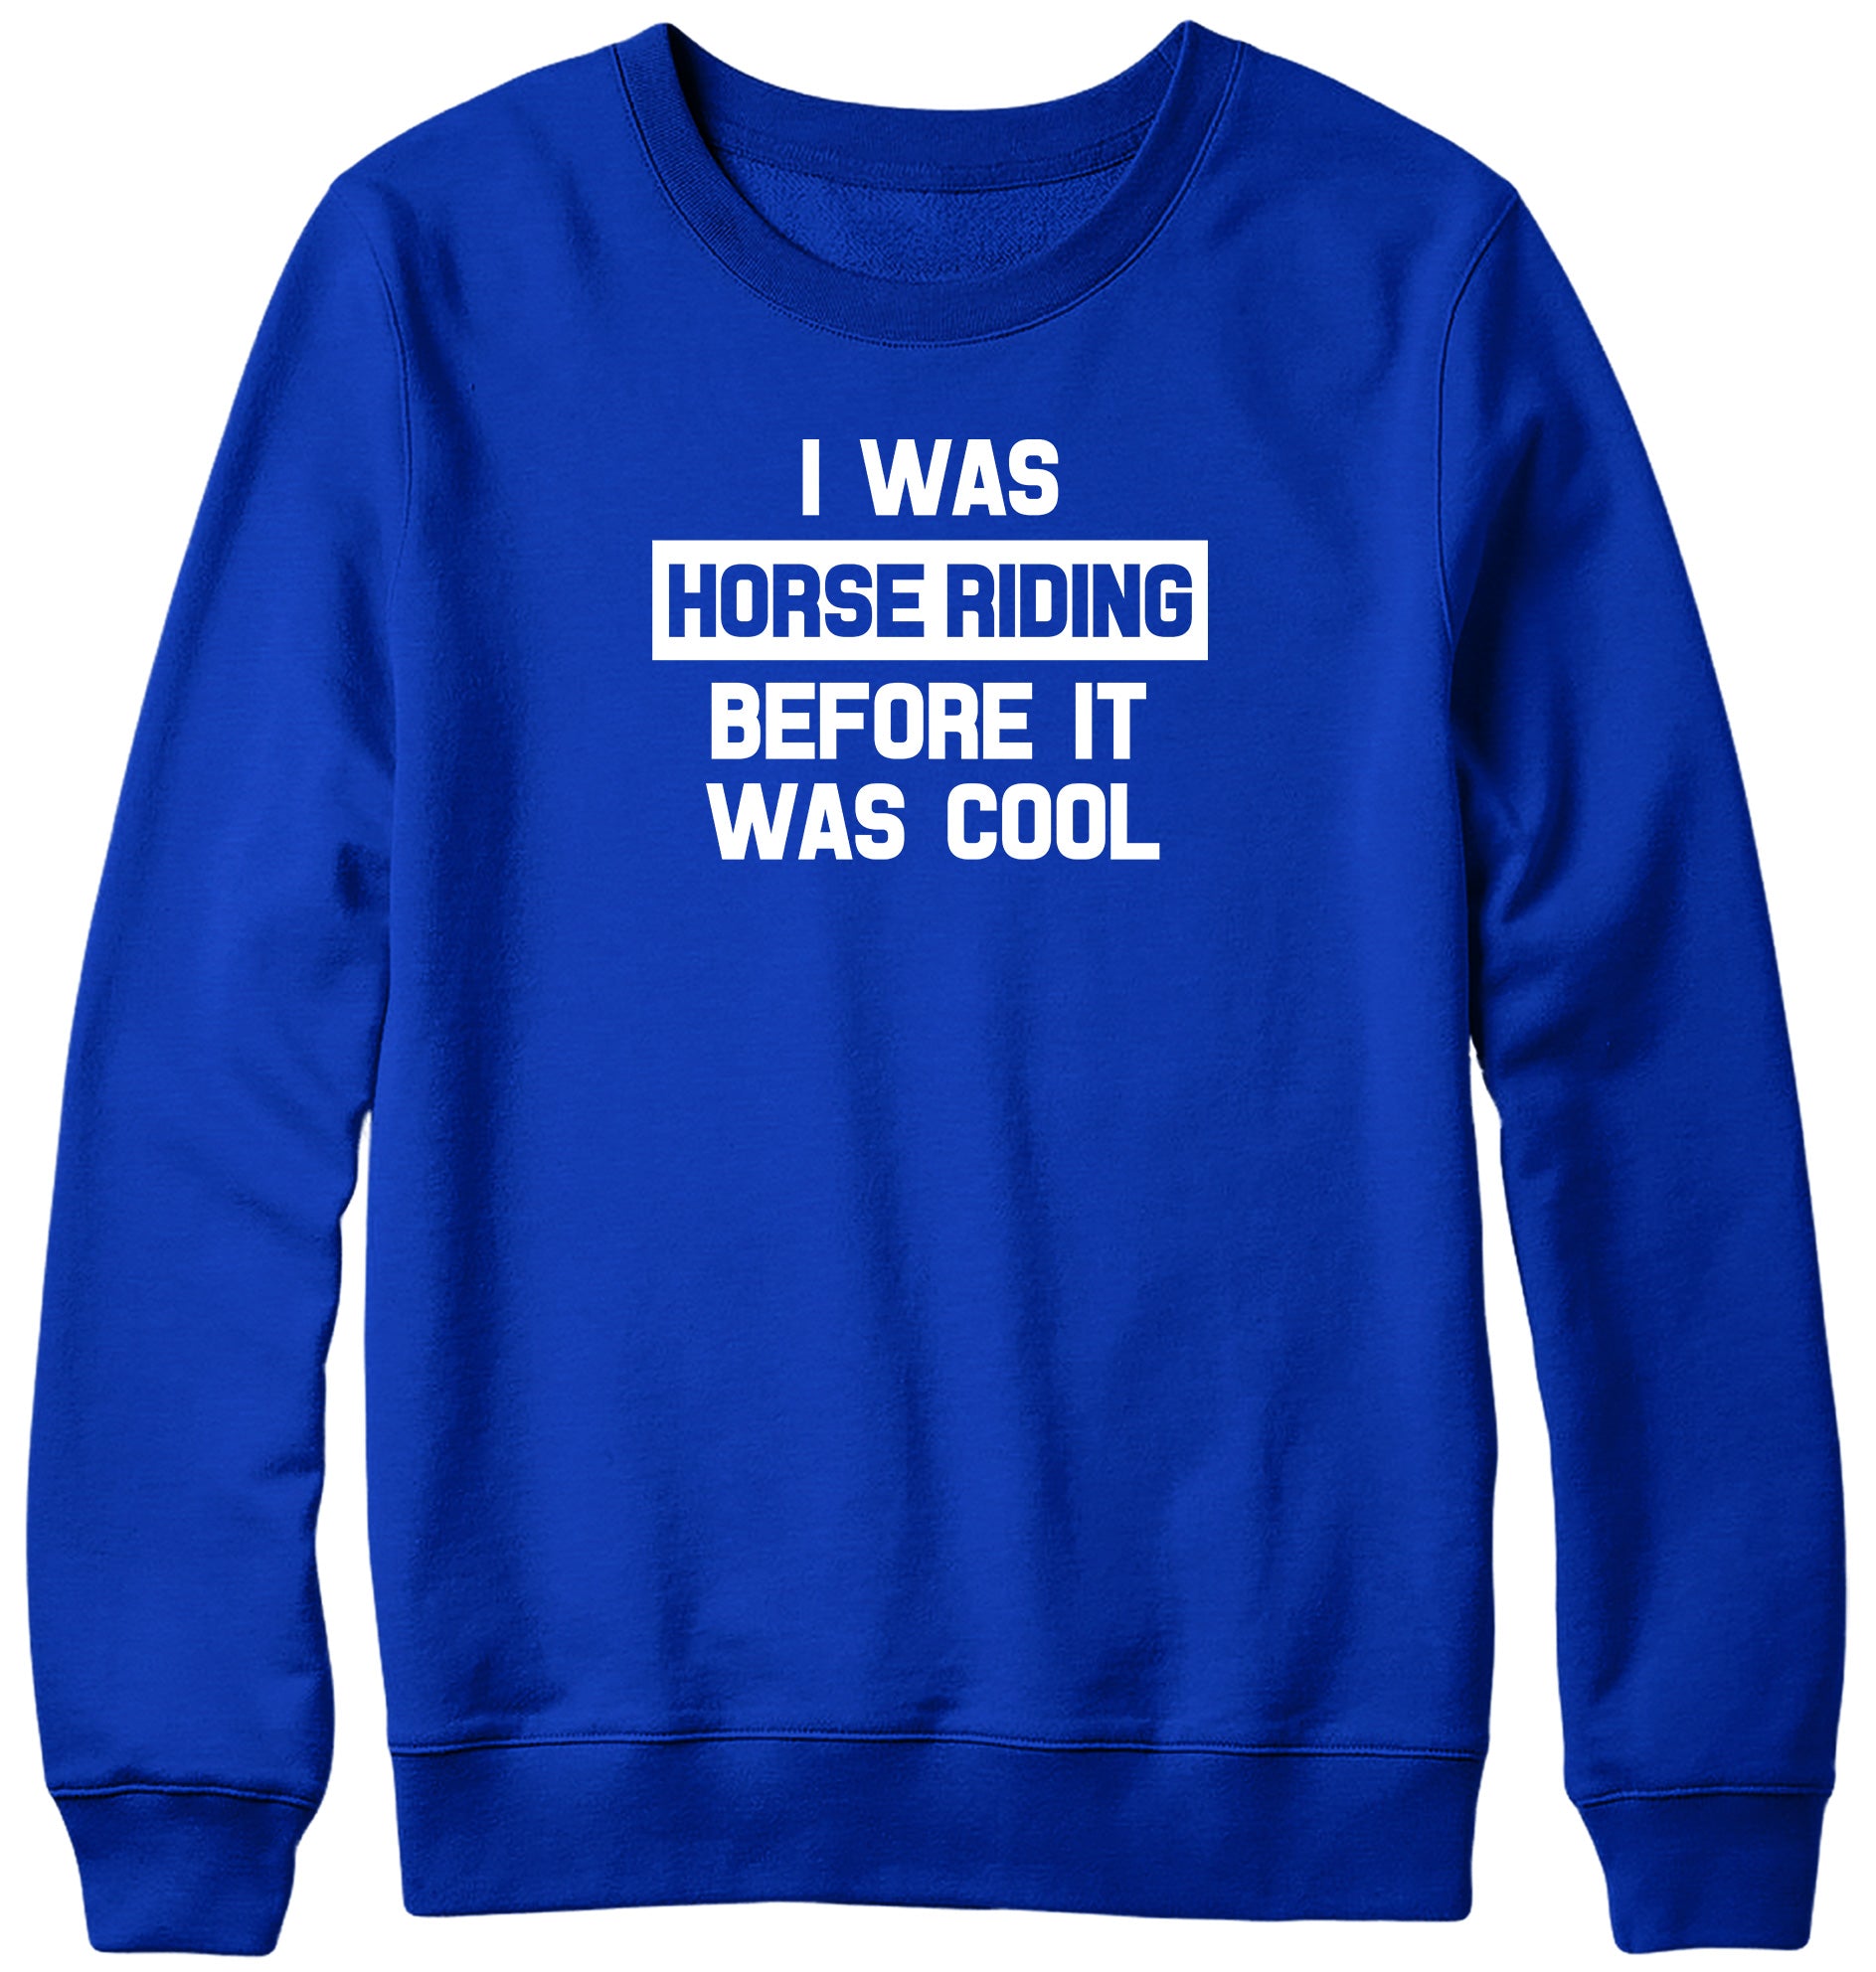 I WAS HORSE RIDING BEFORE IT WAS COOL WOMENS LADIES MENS UNISEX SWEATSHIRT